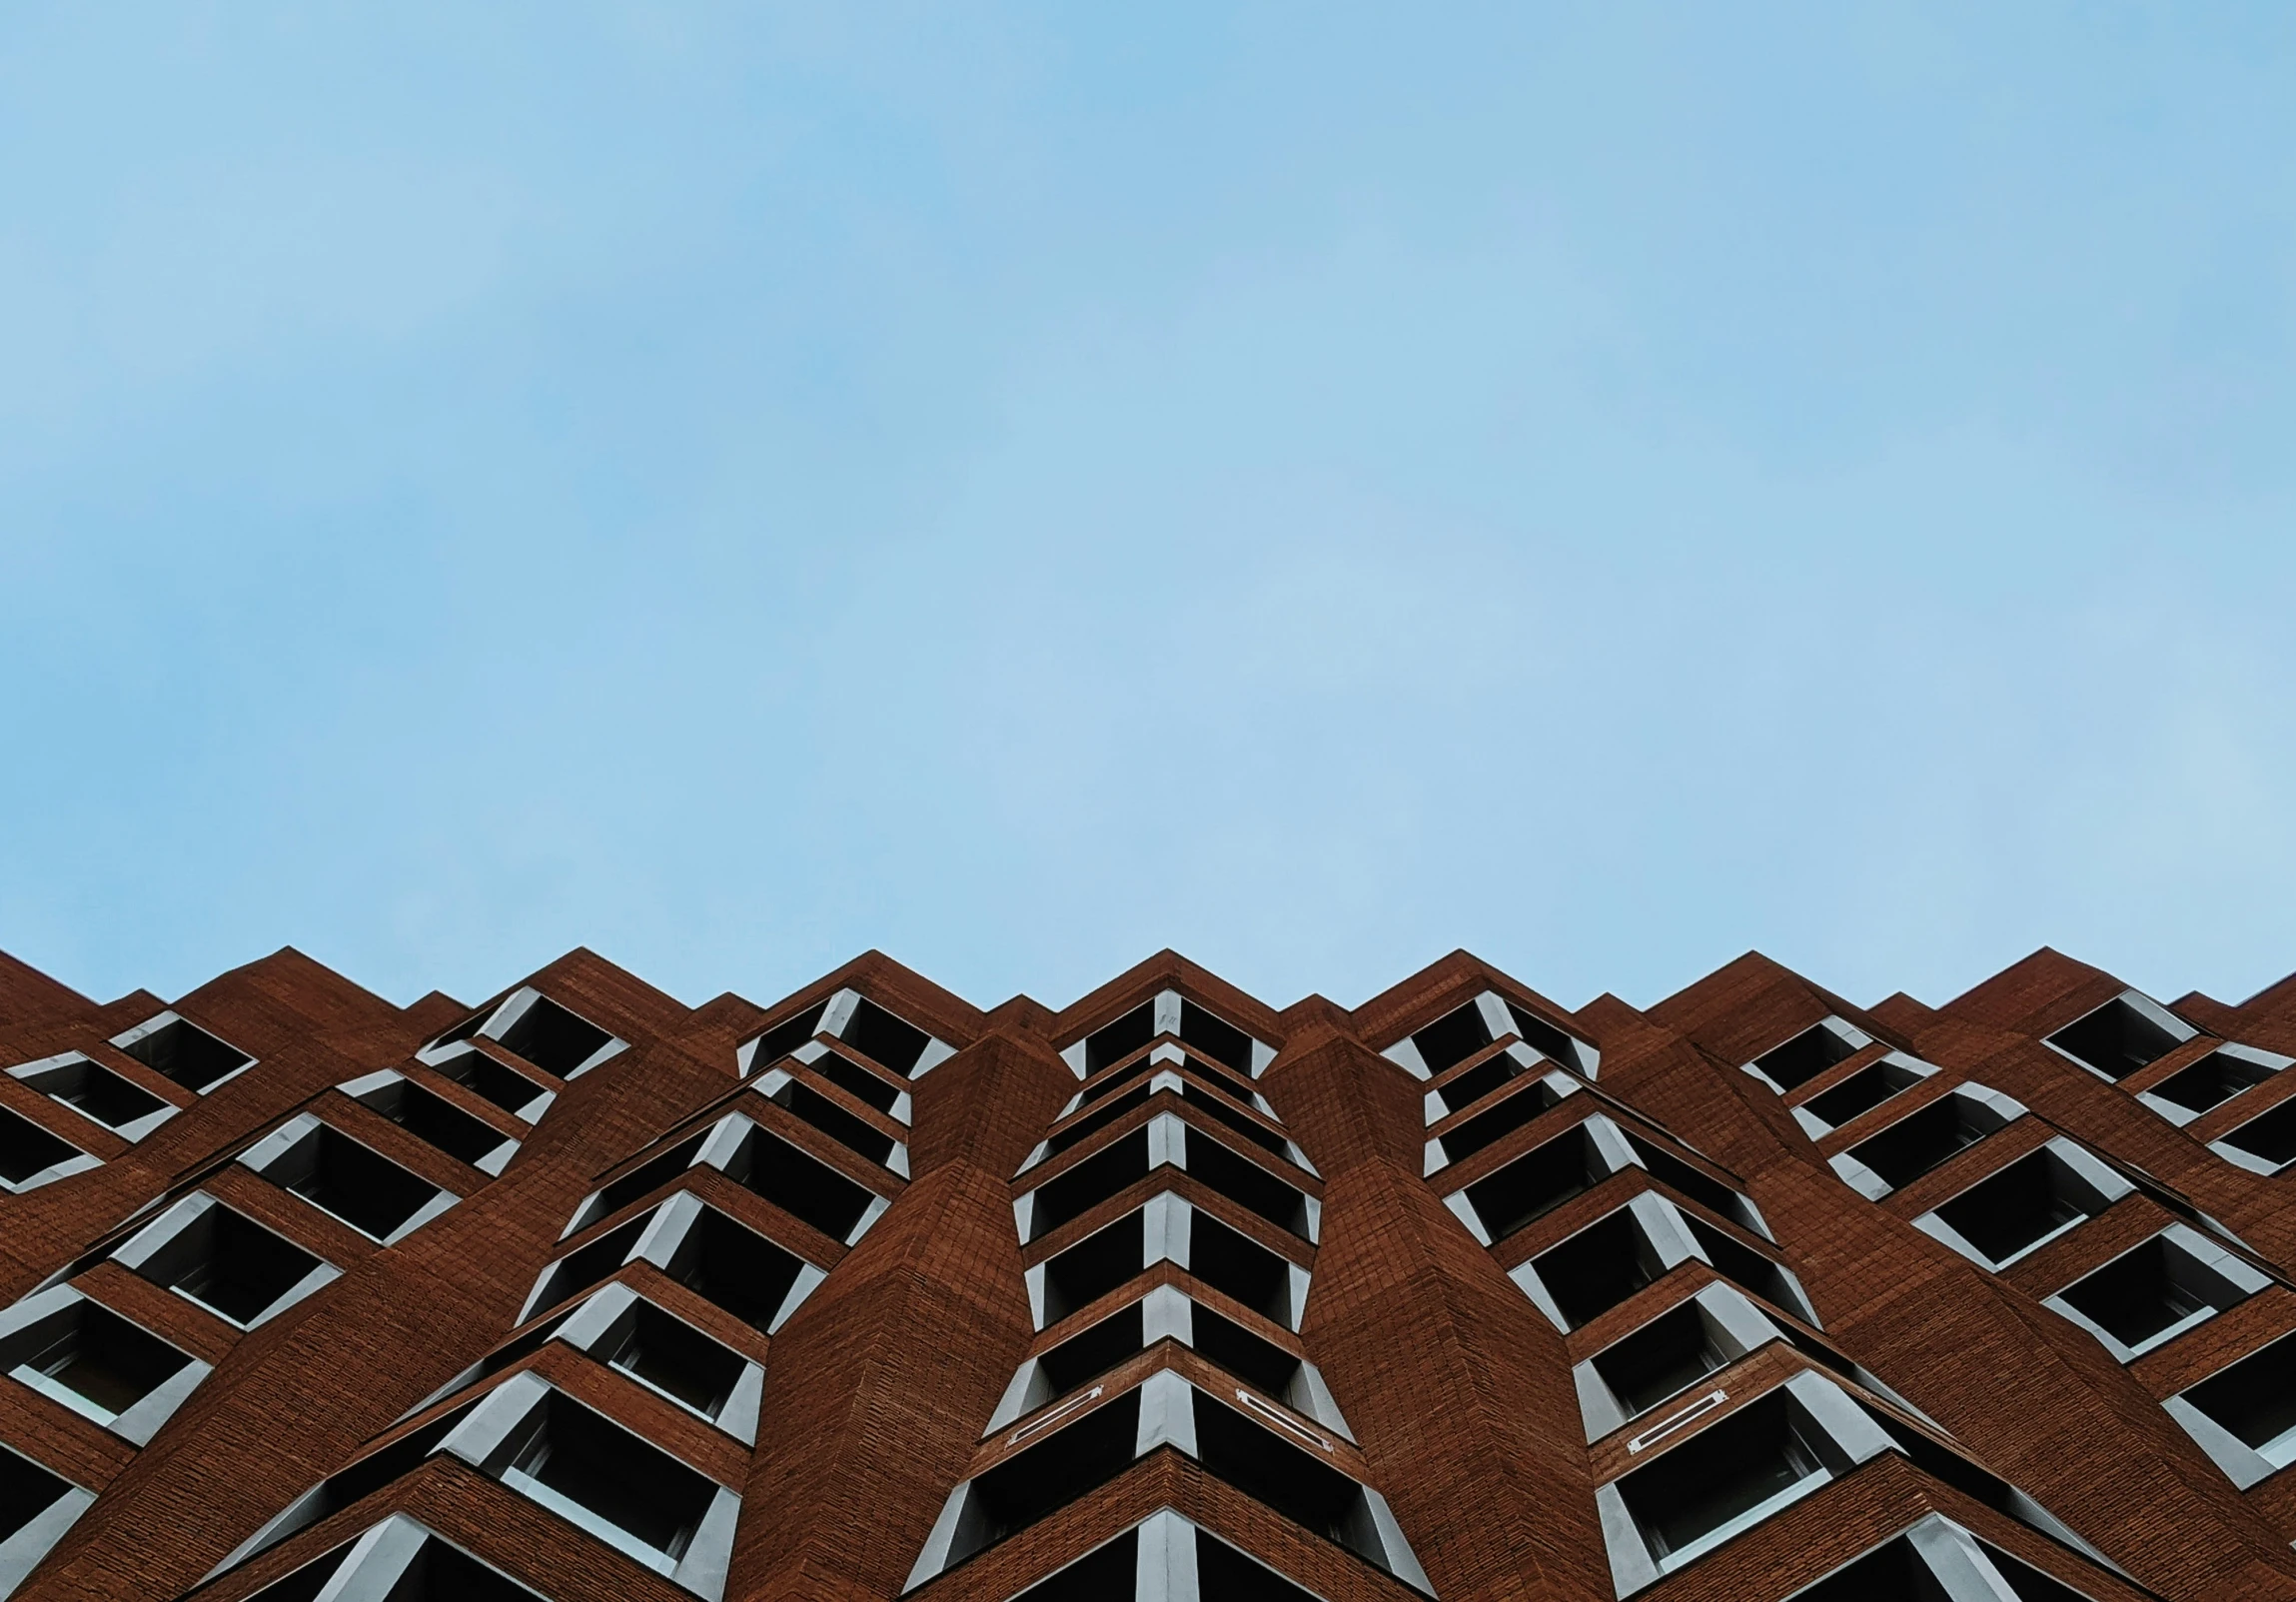 the face of a brick building with balconies and windows against a blue sky